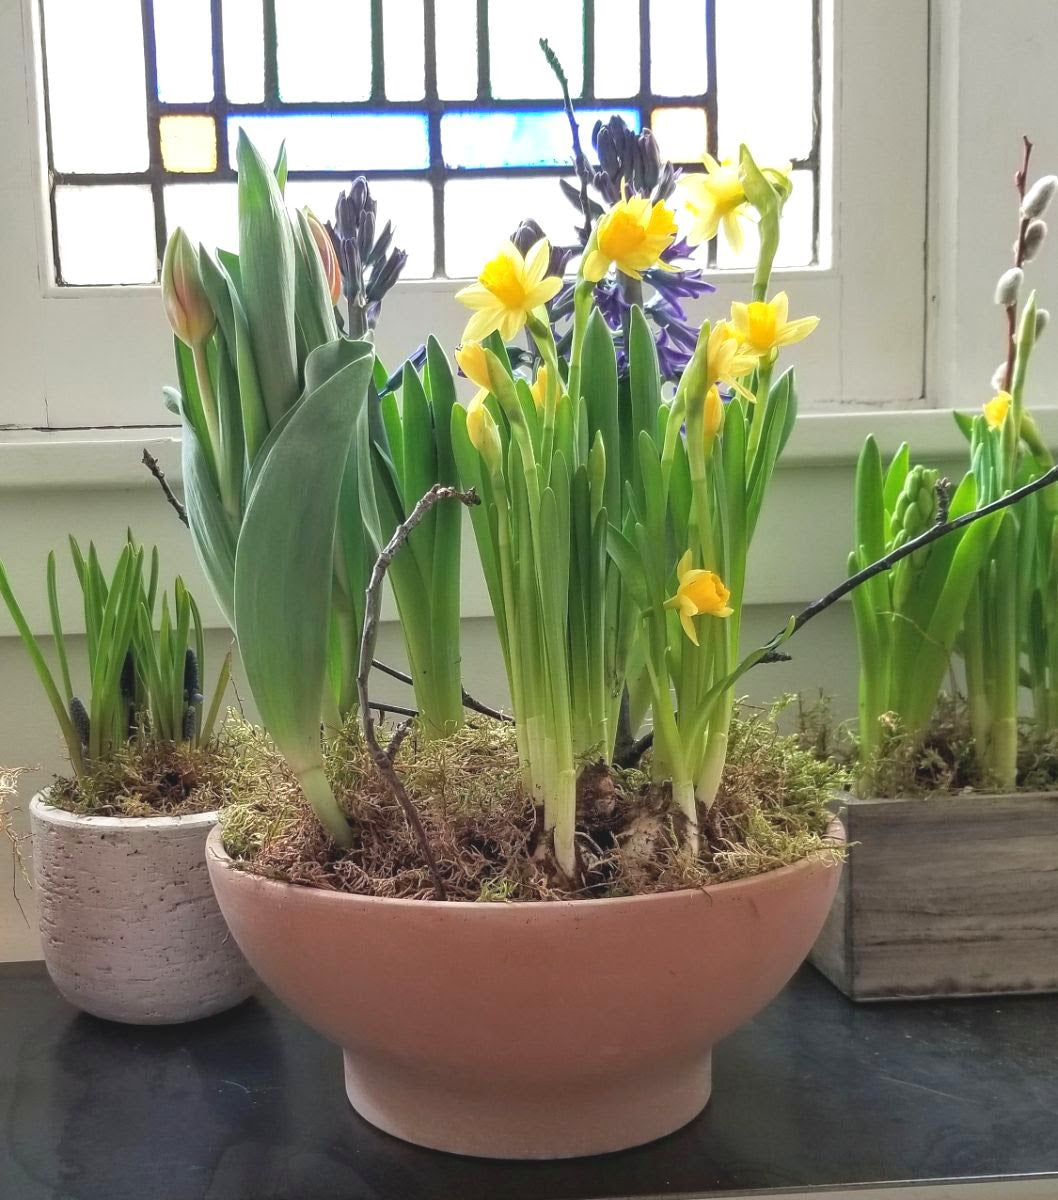 Spring Bulbs are Blooming... April 15, 2020